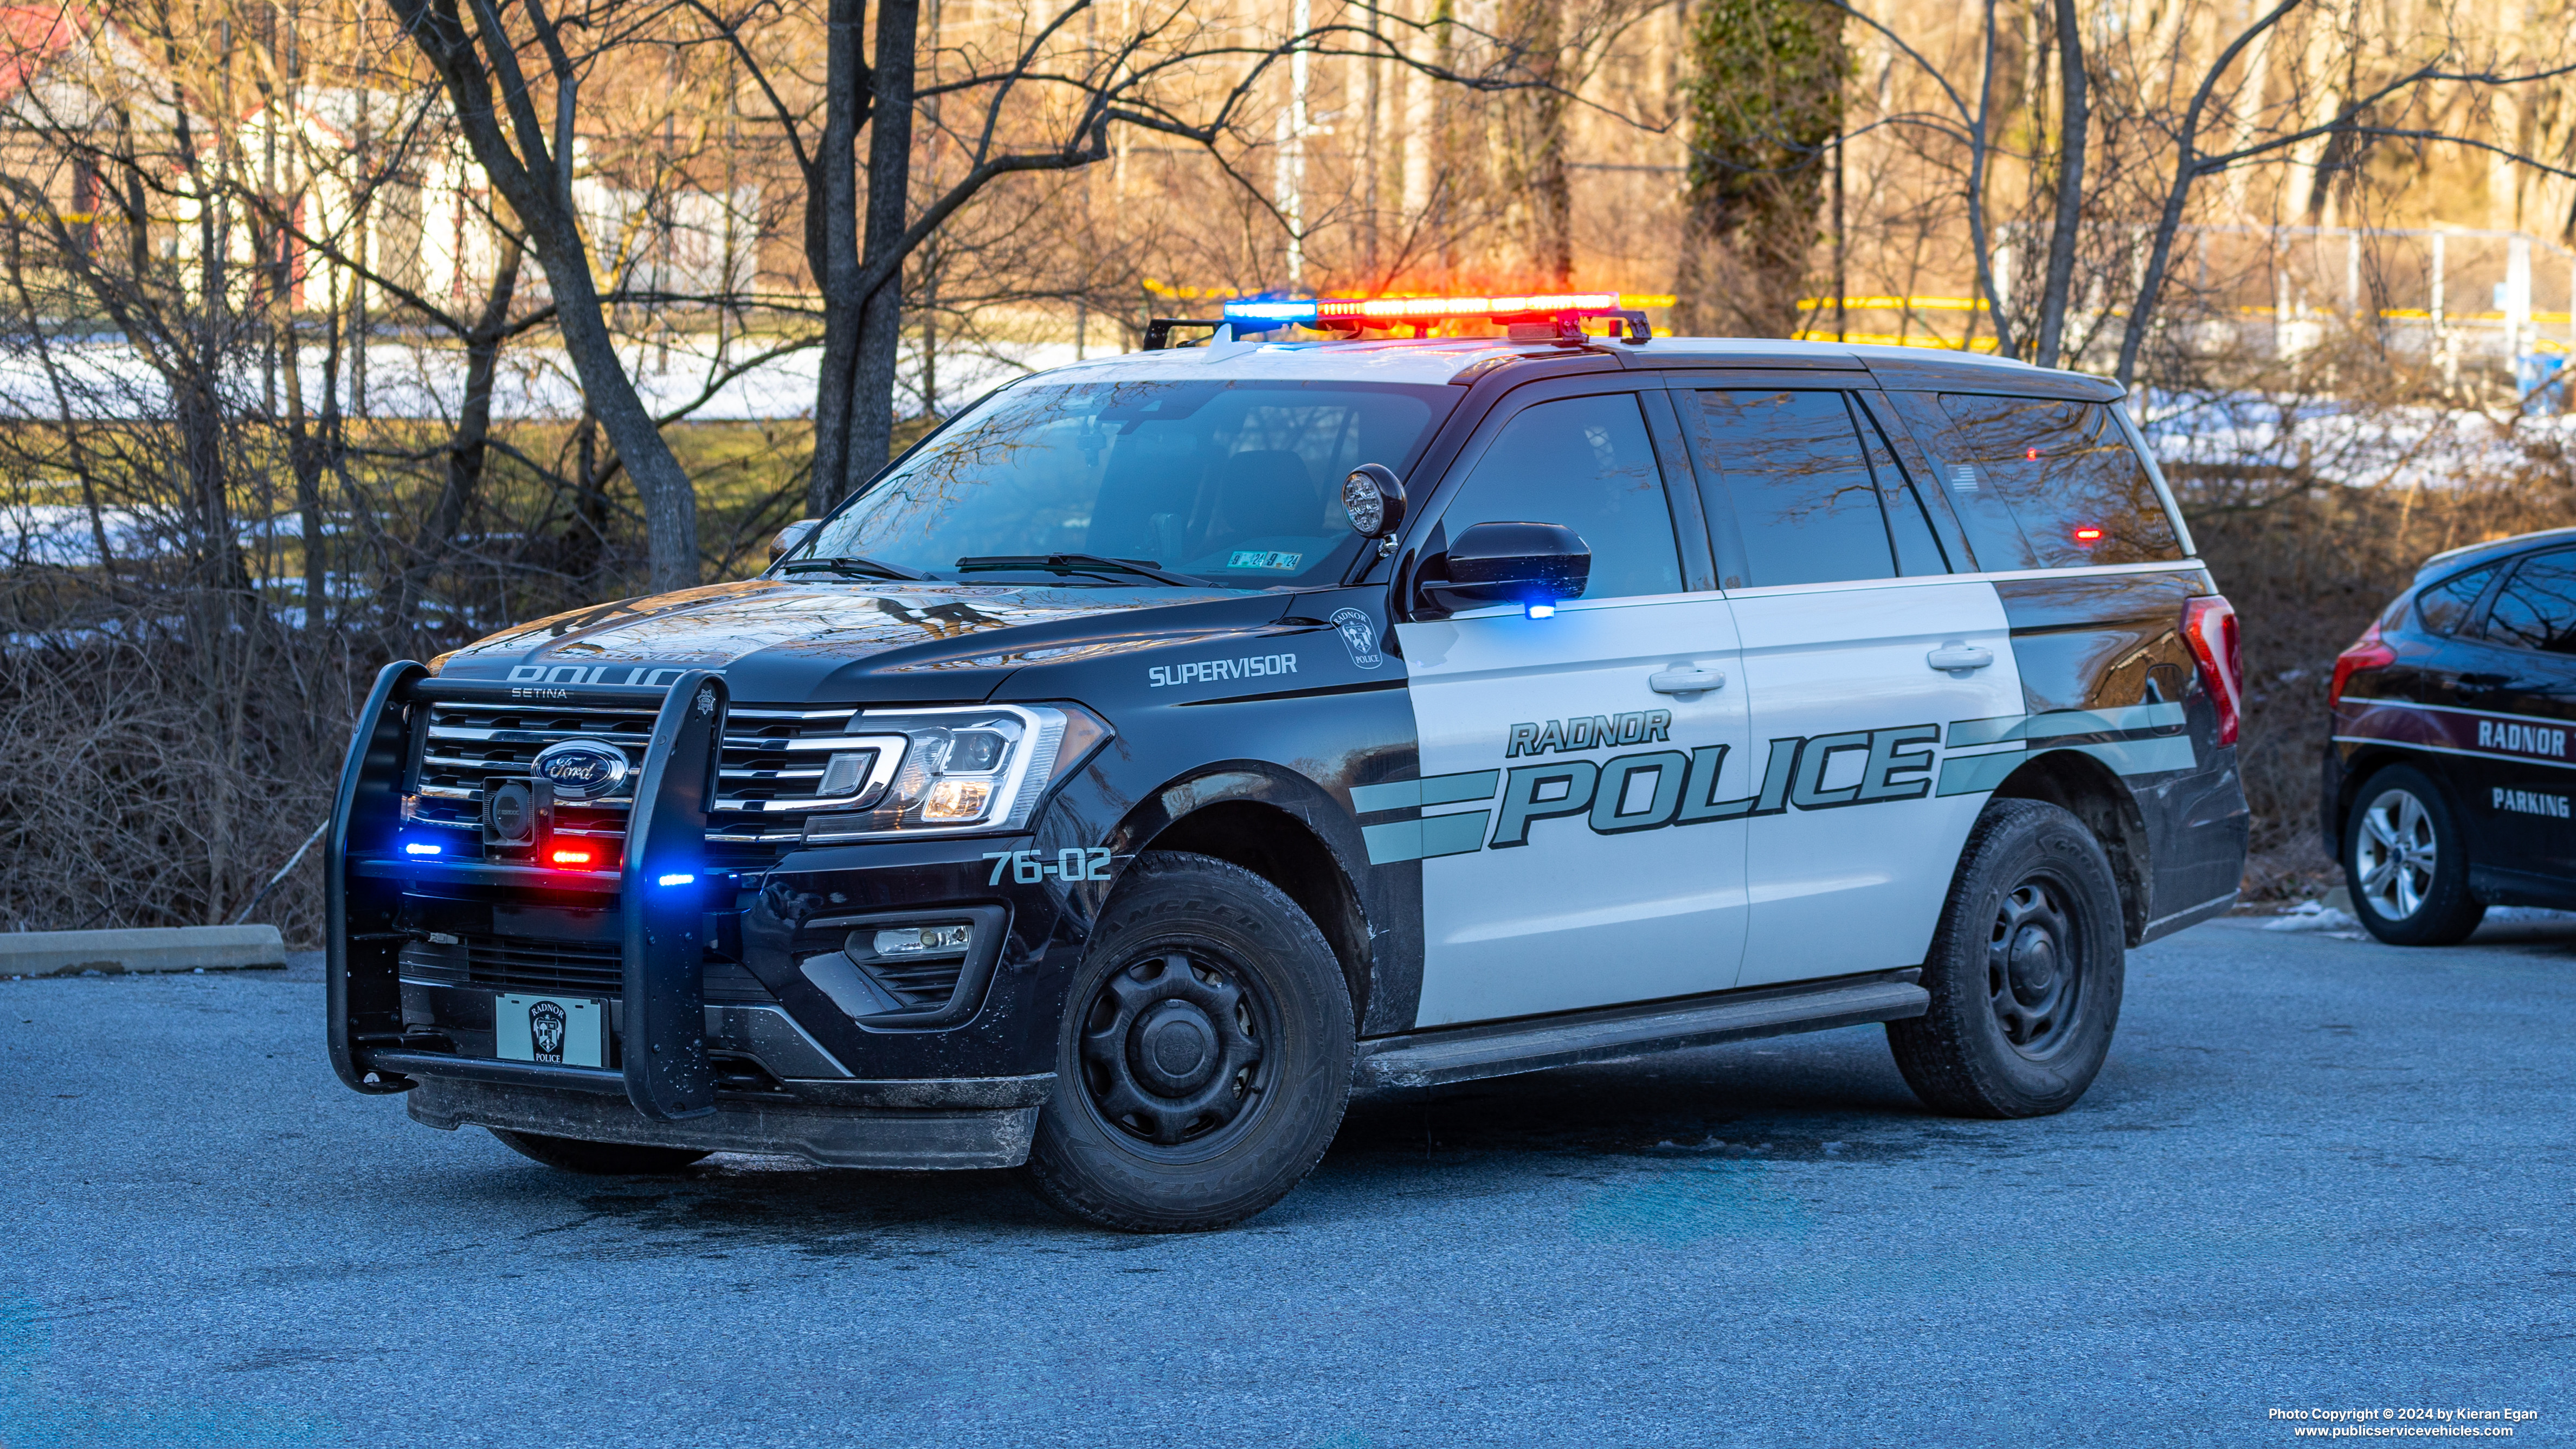 A photo  of Radnor Township Police
            Cruiser 76-02, a 2018-2020 Ford Expedition             taken by Kieran Egan